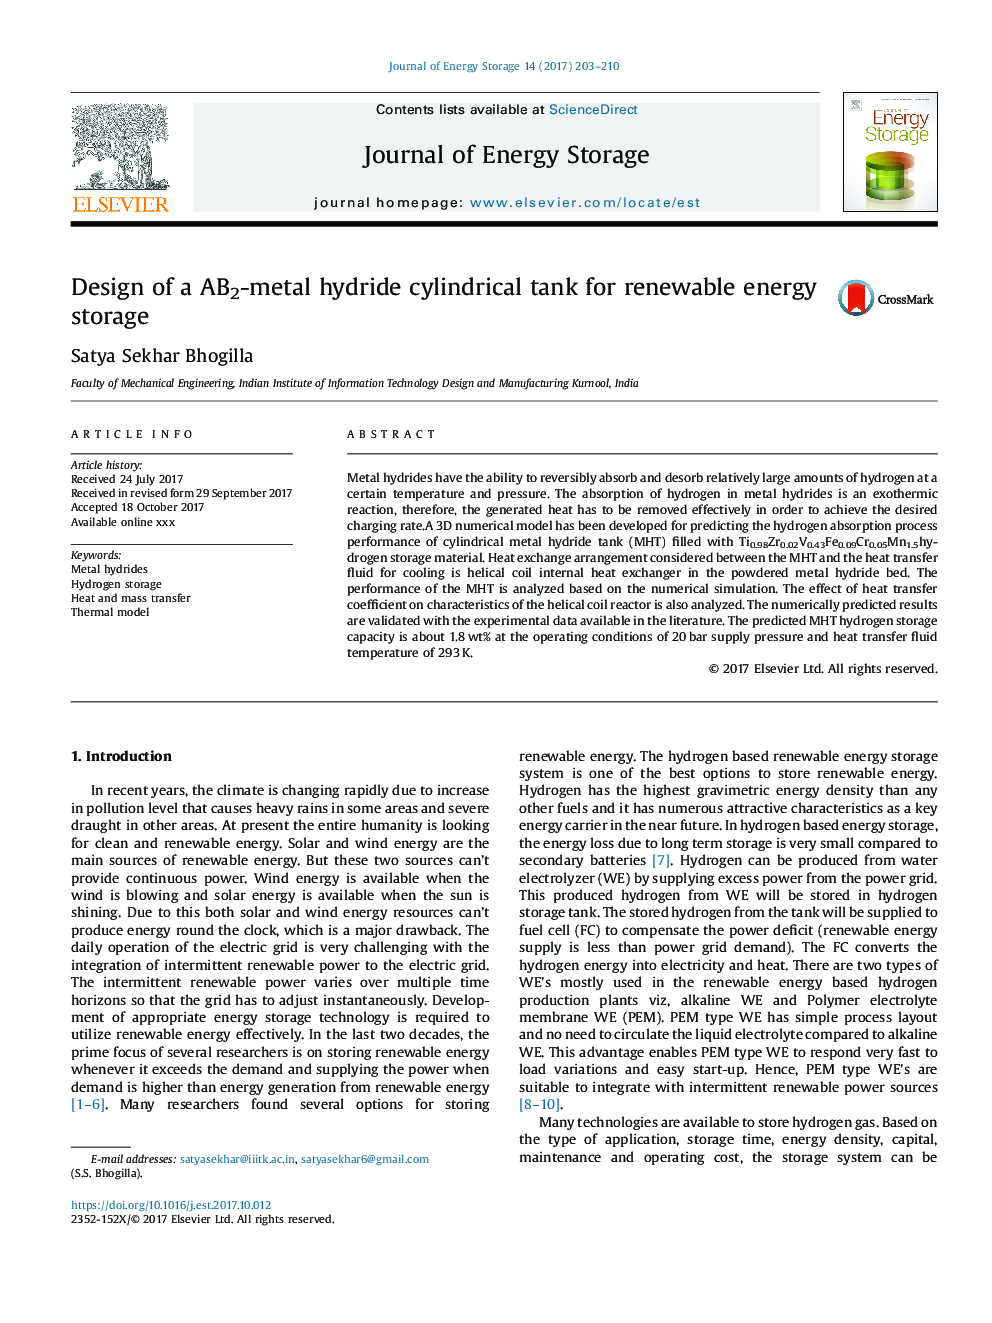 Design of a AB2-metal hydride cylindrical tank for renewable energy storage